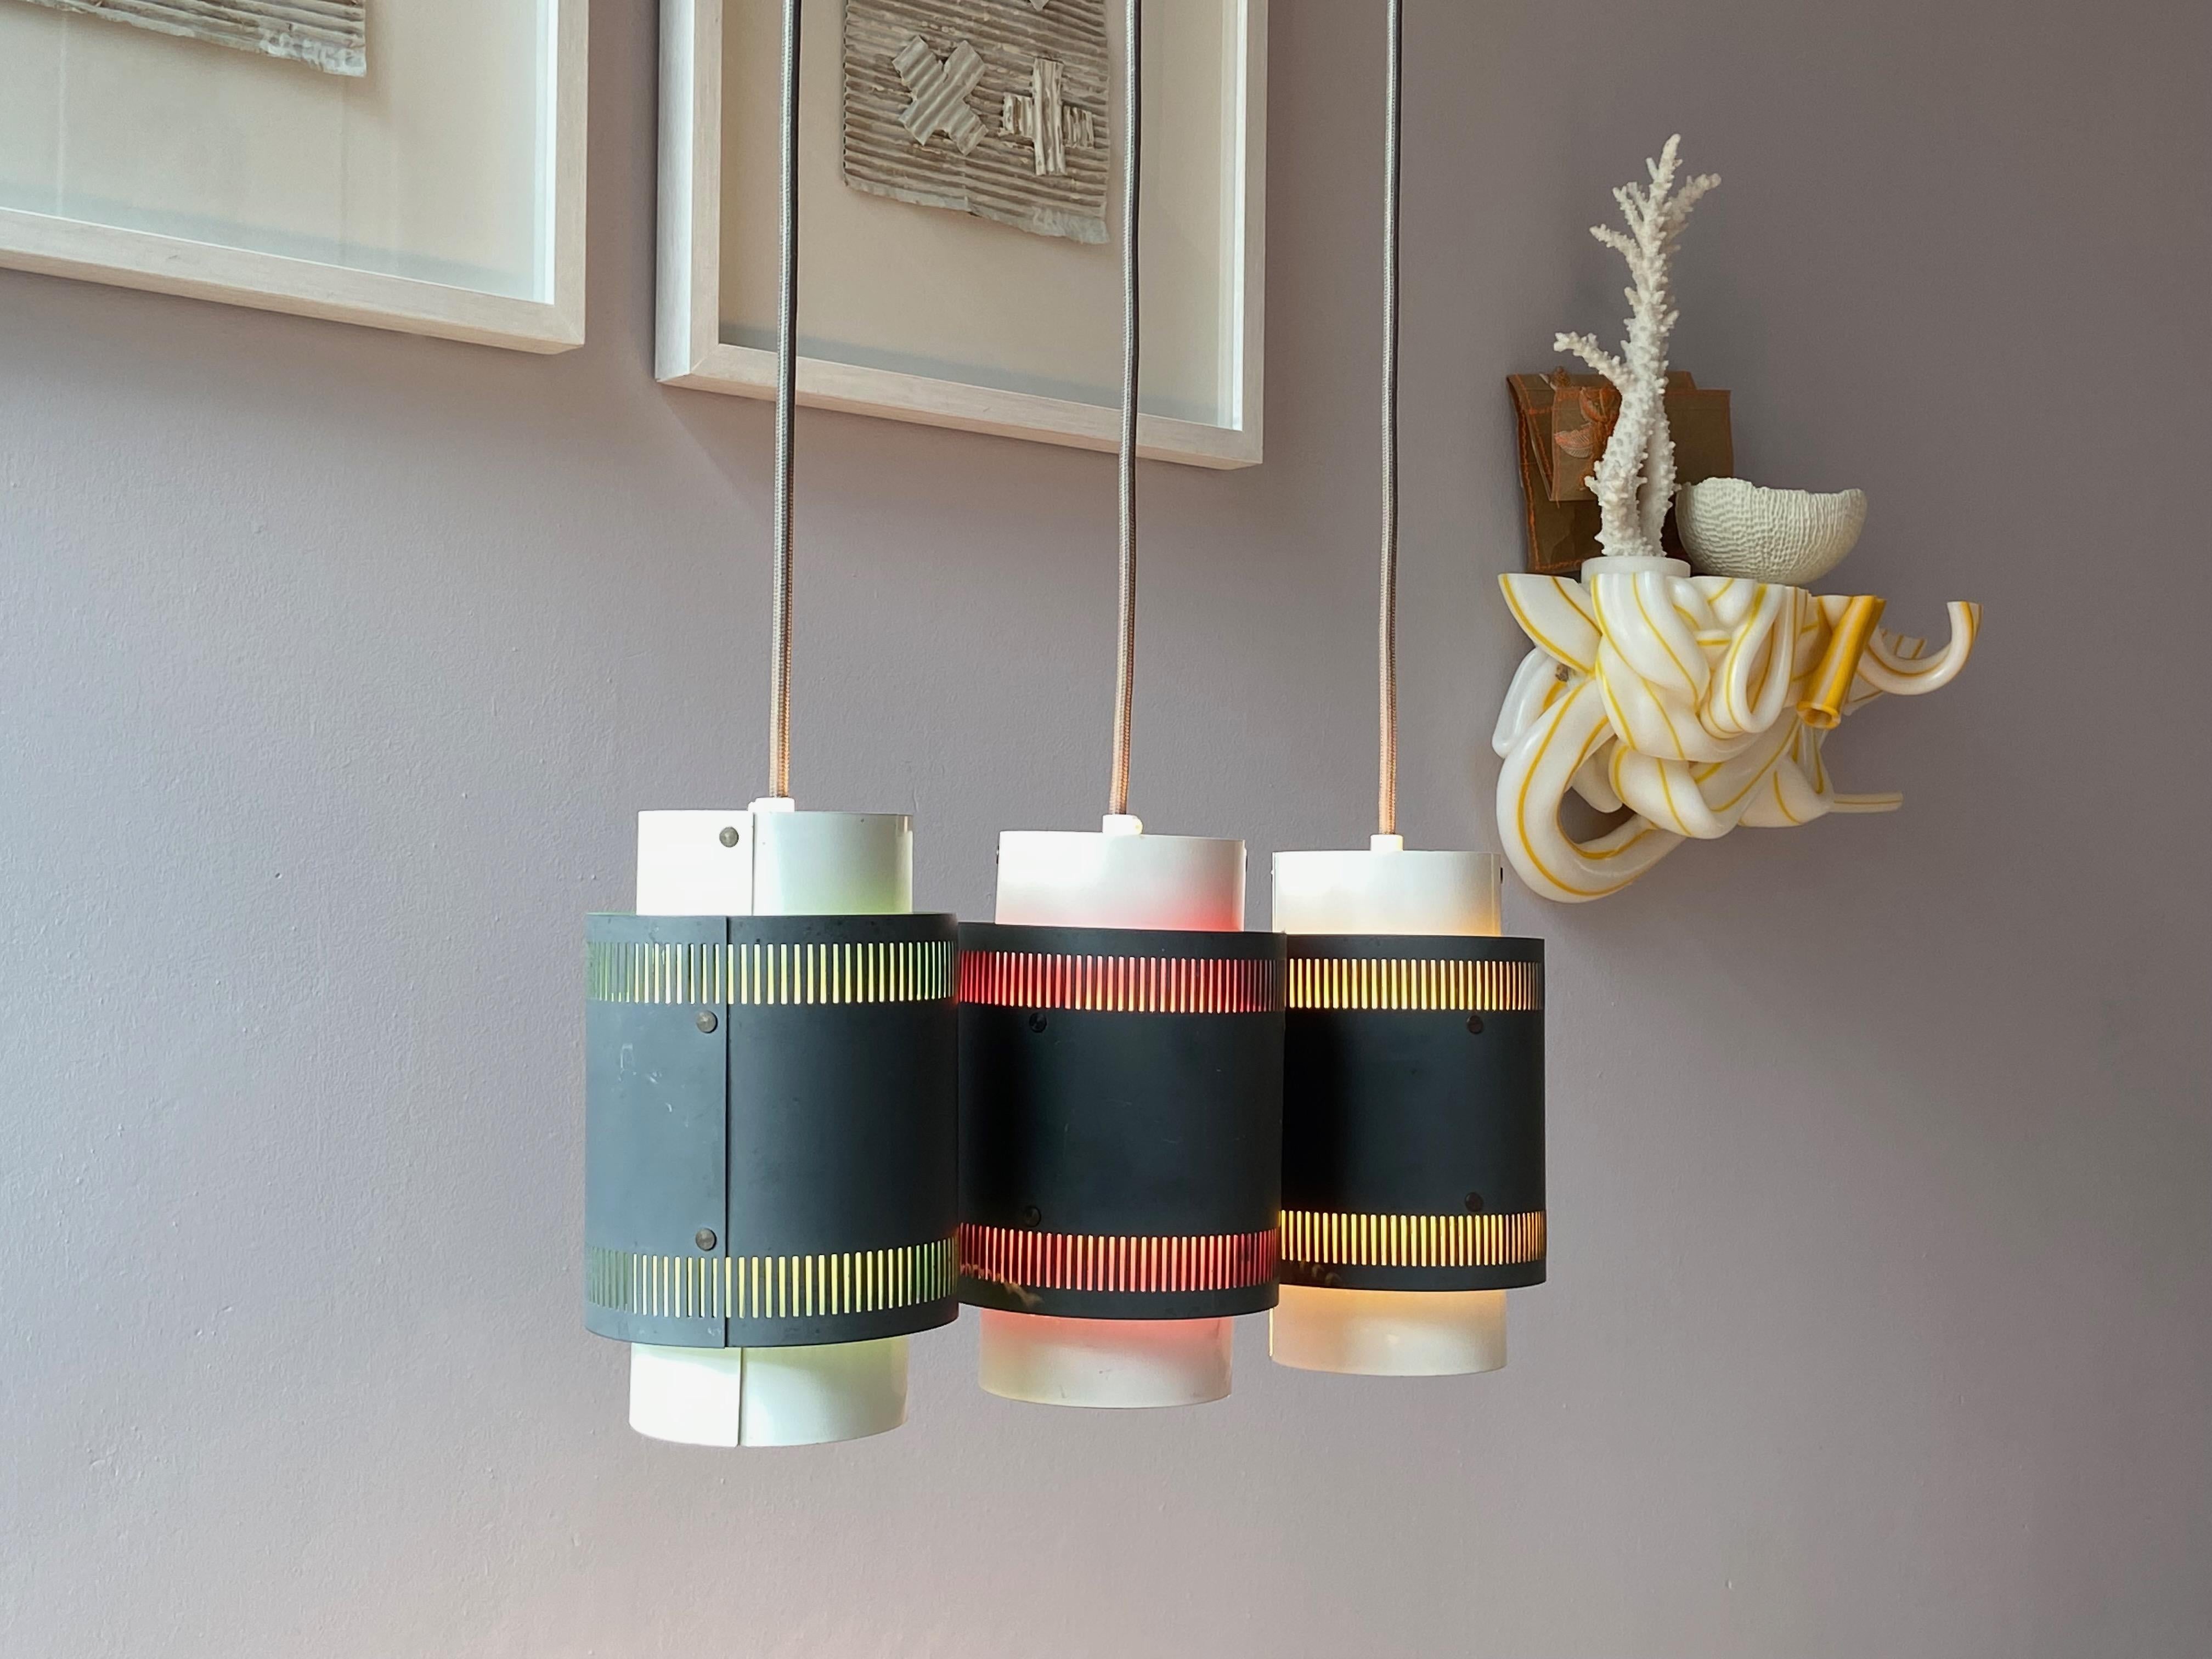 Nice set of three pendant lamps from the 1960's, Made in Denmark. Inside in yellow, red and green, outside grey and white with 1x E26/27 Edison screw socket in original condition. No parts missing, with new grey fabric cord, ready to use with 110